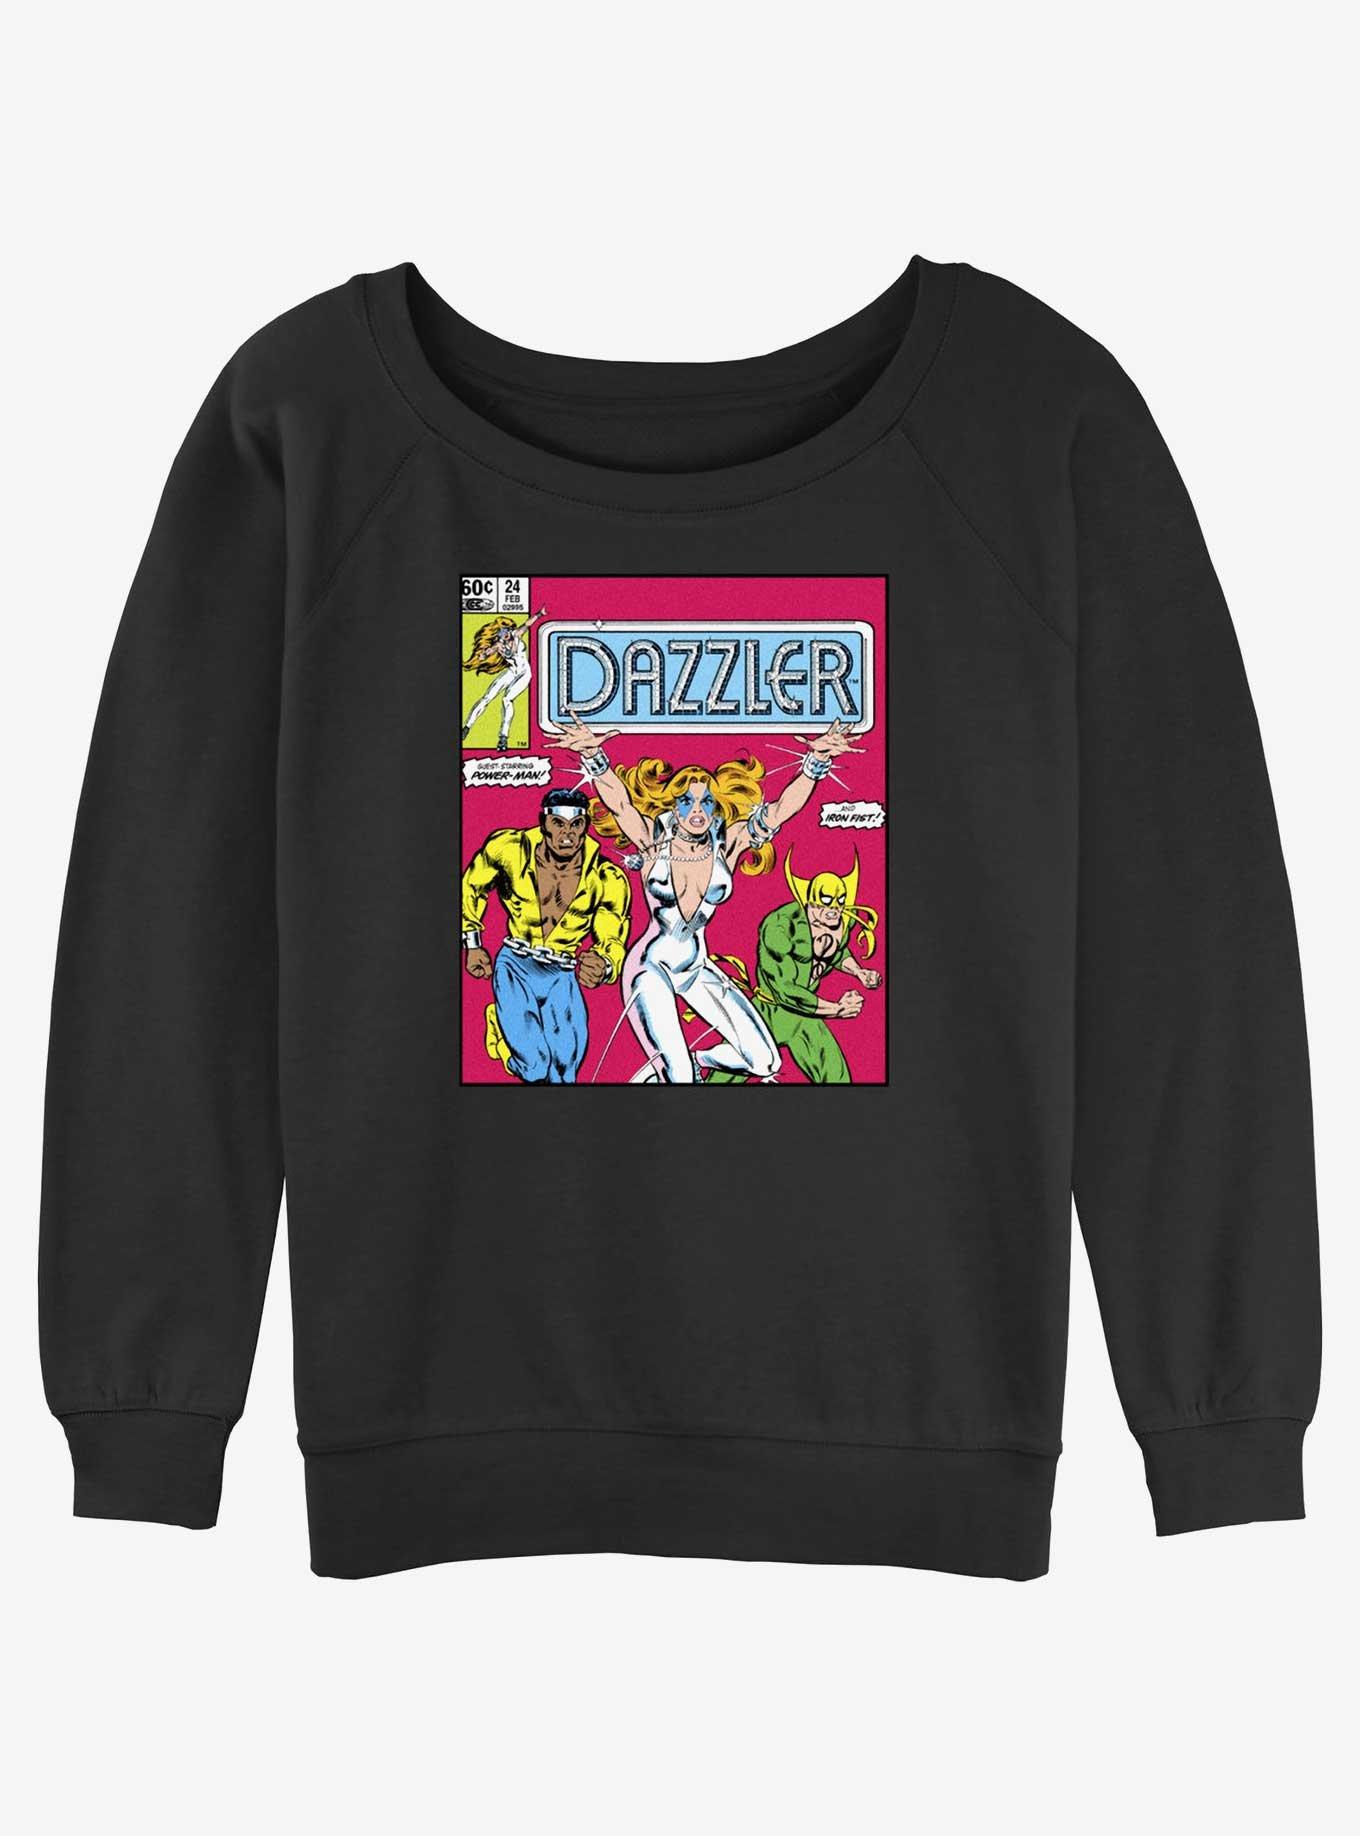 Marvel Dazzler Power Man and Iron Fist Comic Cover Girls Slouchy Sweatshirt, , hi-res